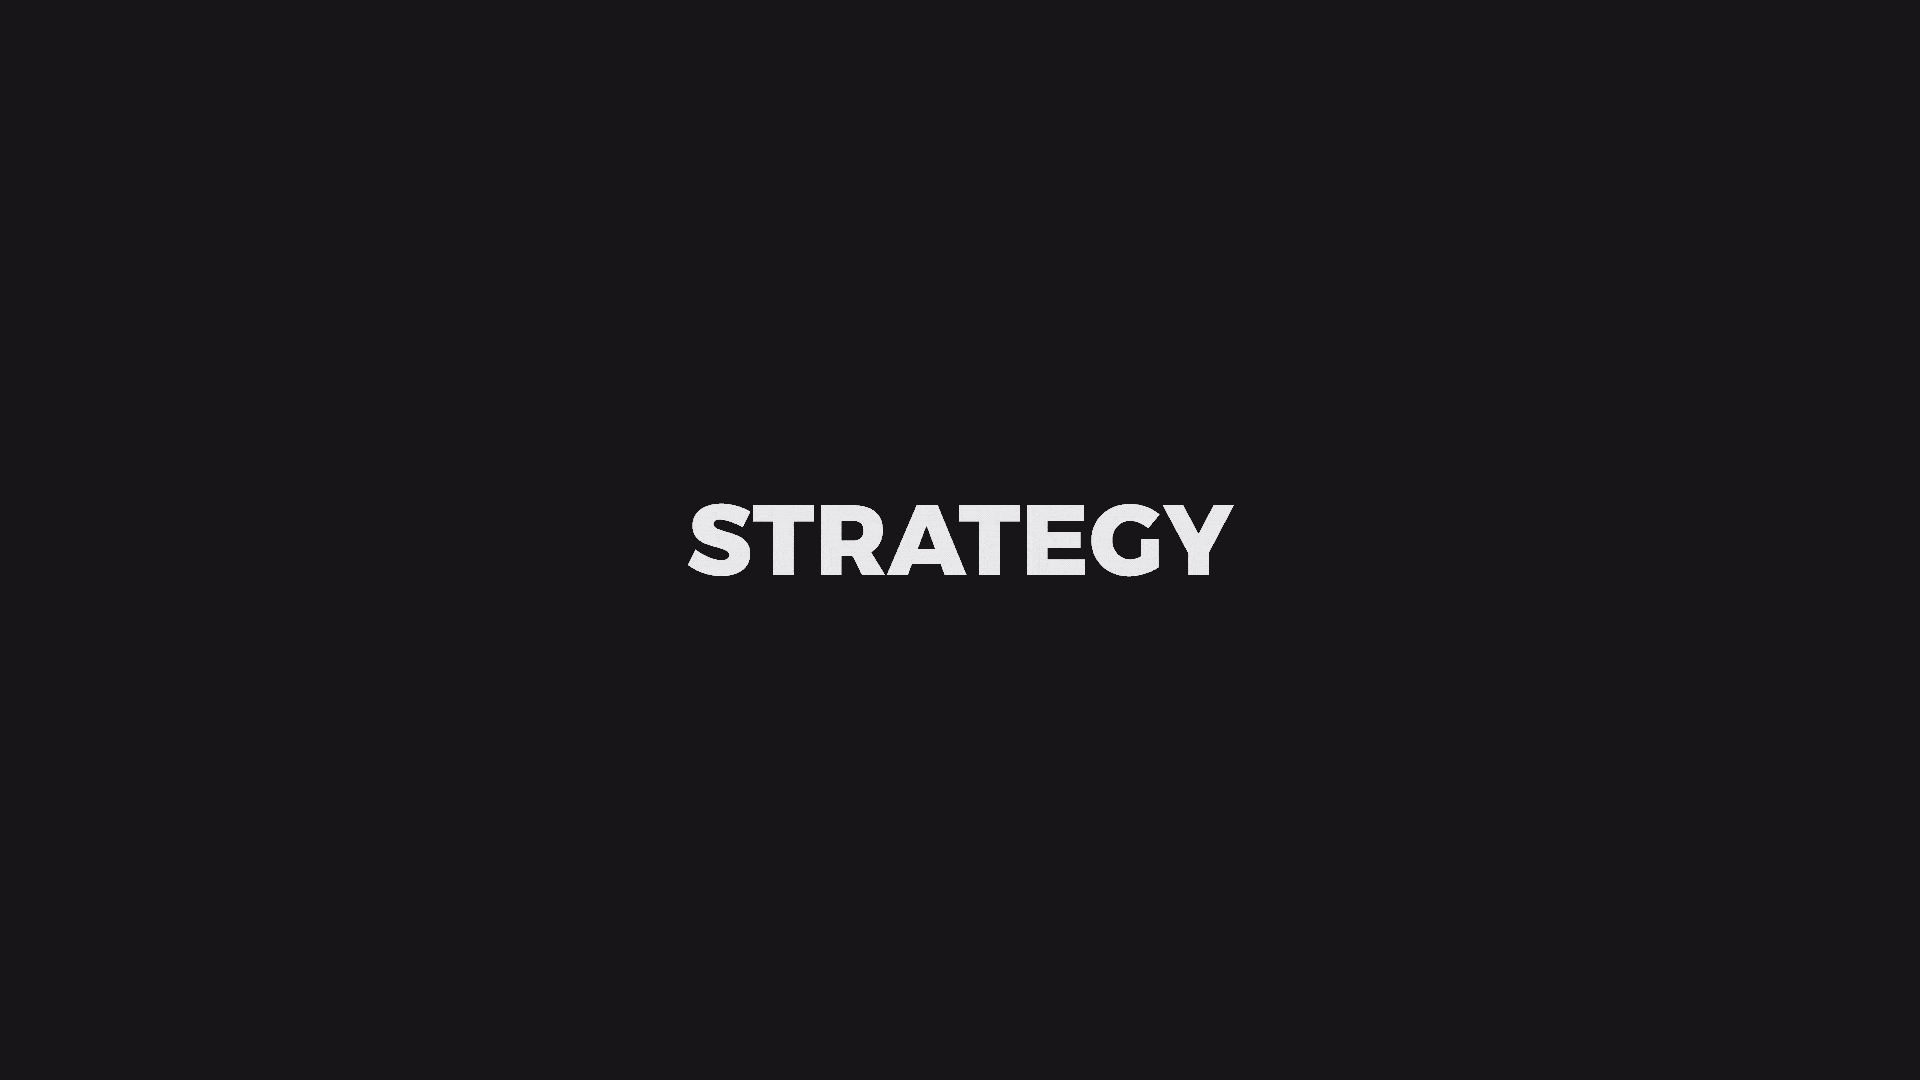 Strategy without execution is worth nothing.